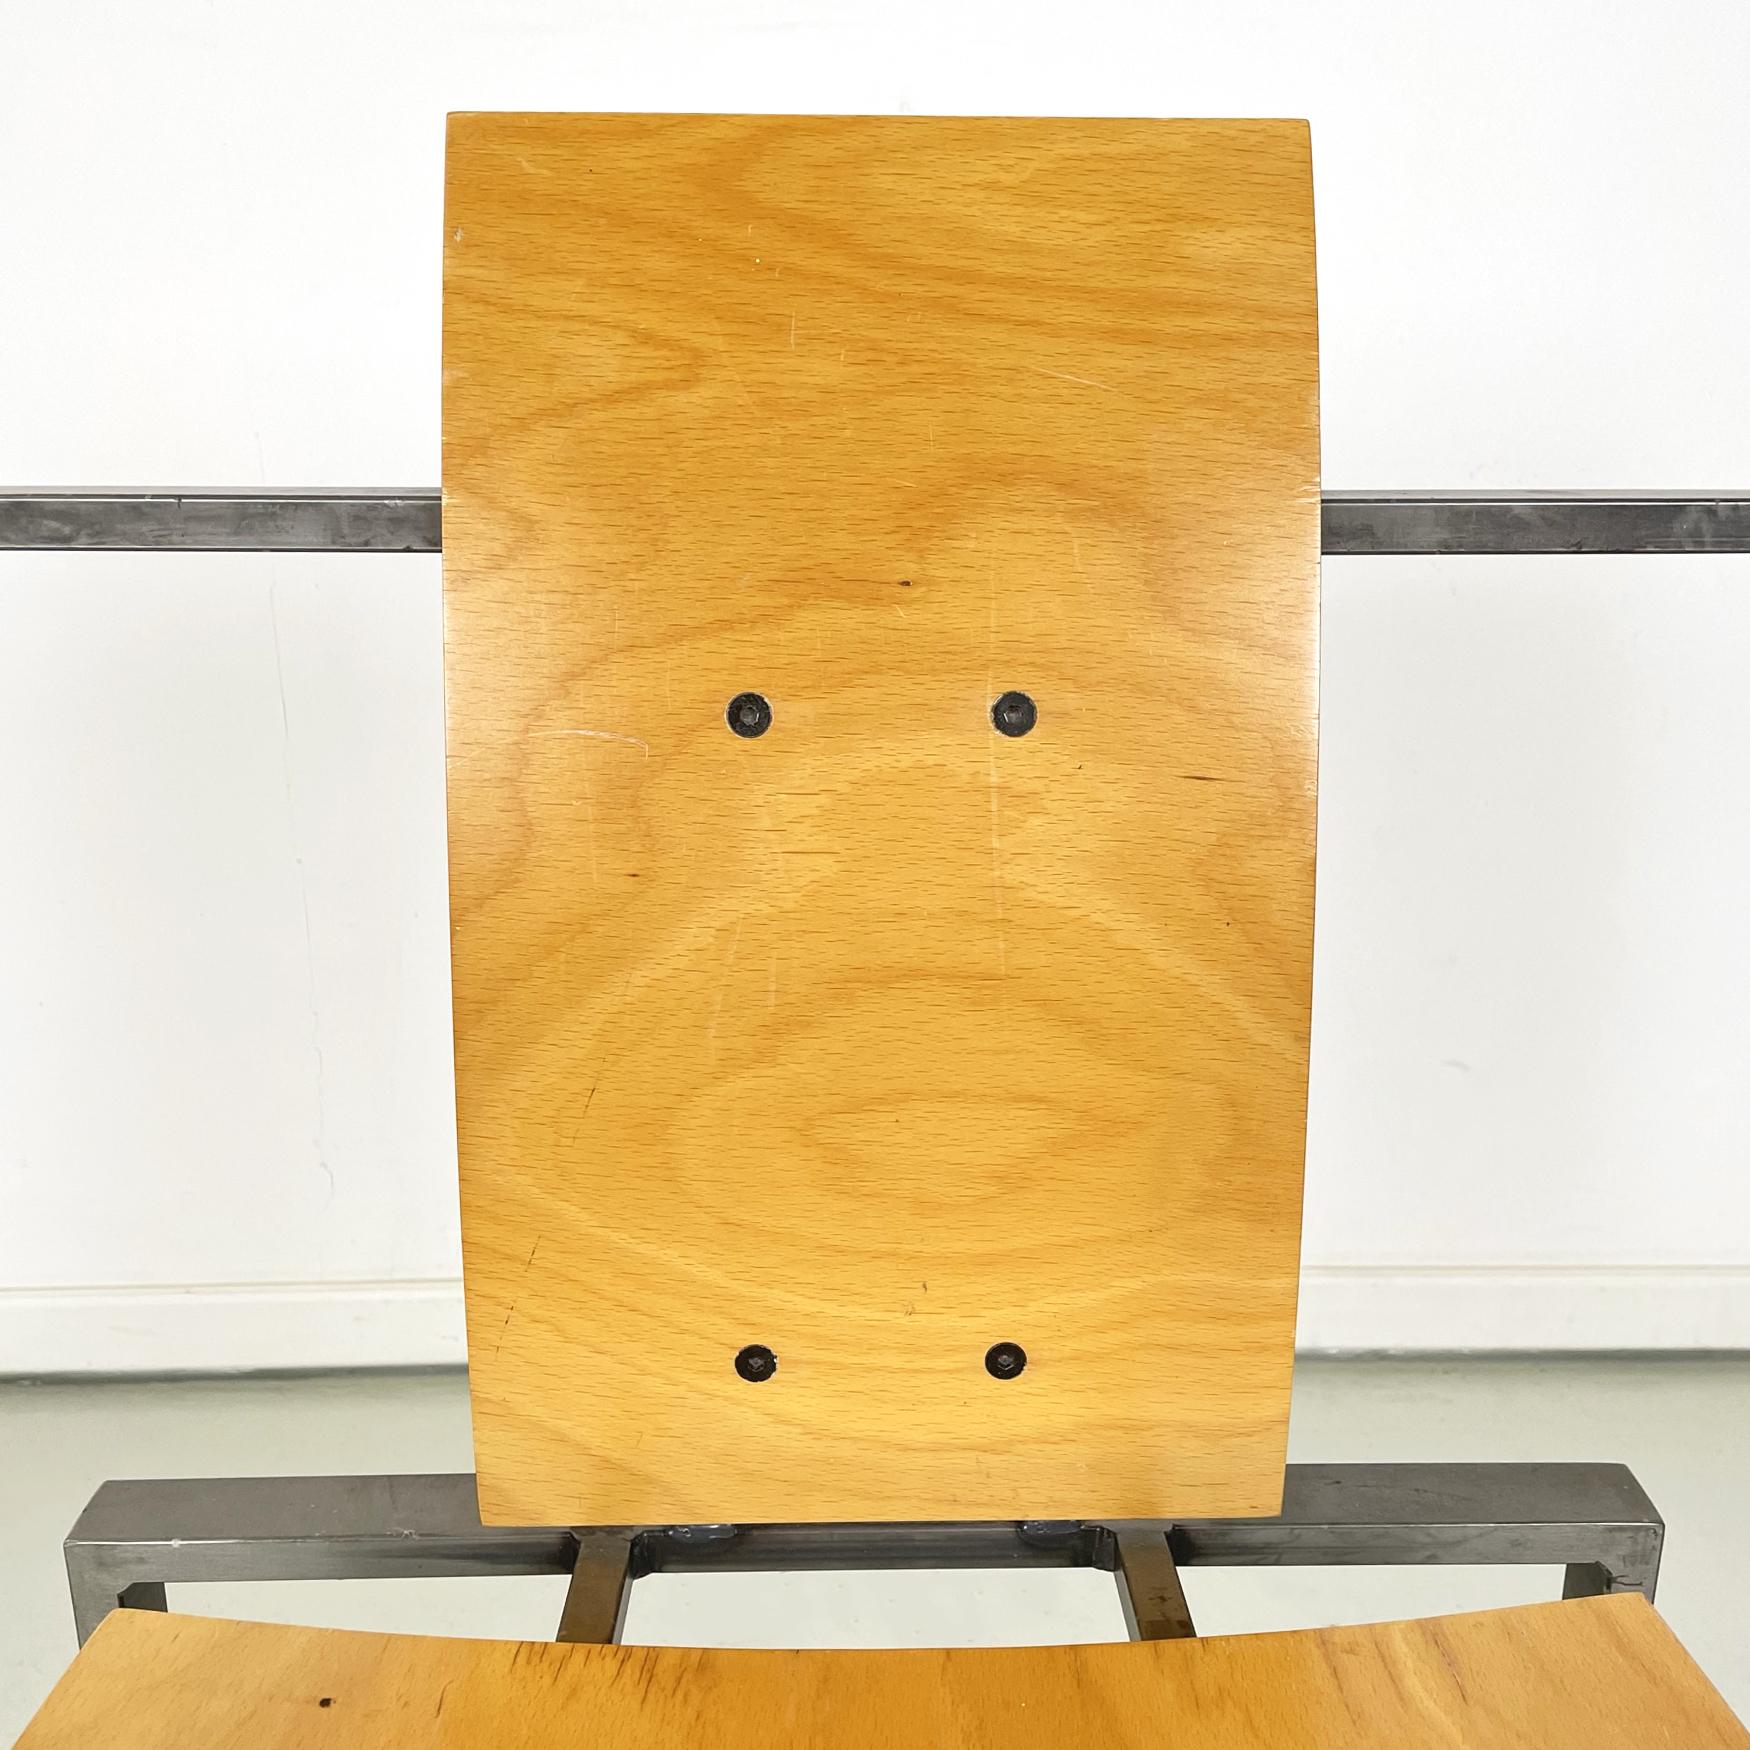 German Modern Squared Chair in Wood and Metal by Karl-Friedrich Foster KKF, 1980 For Sale 3